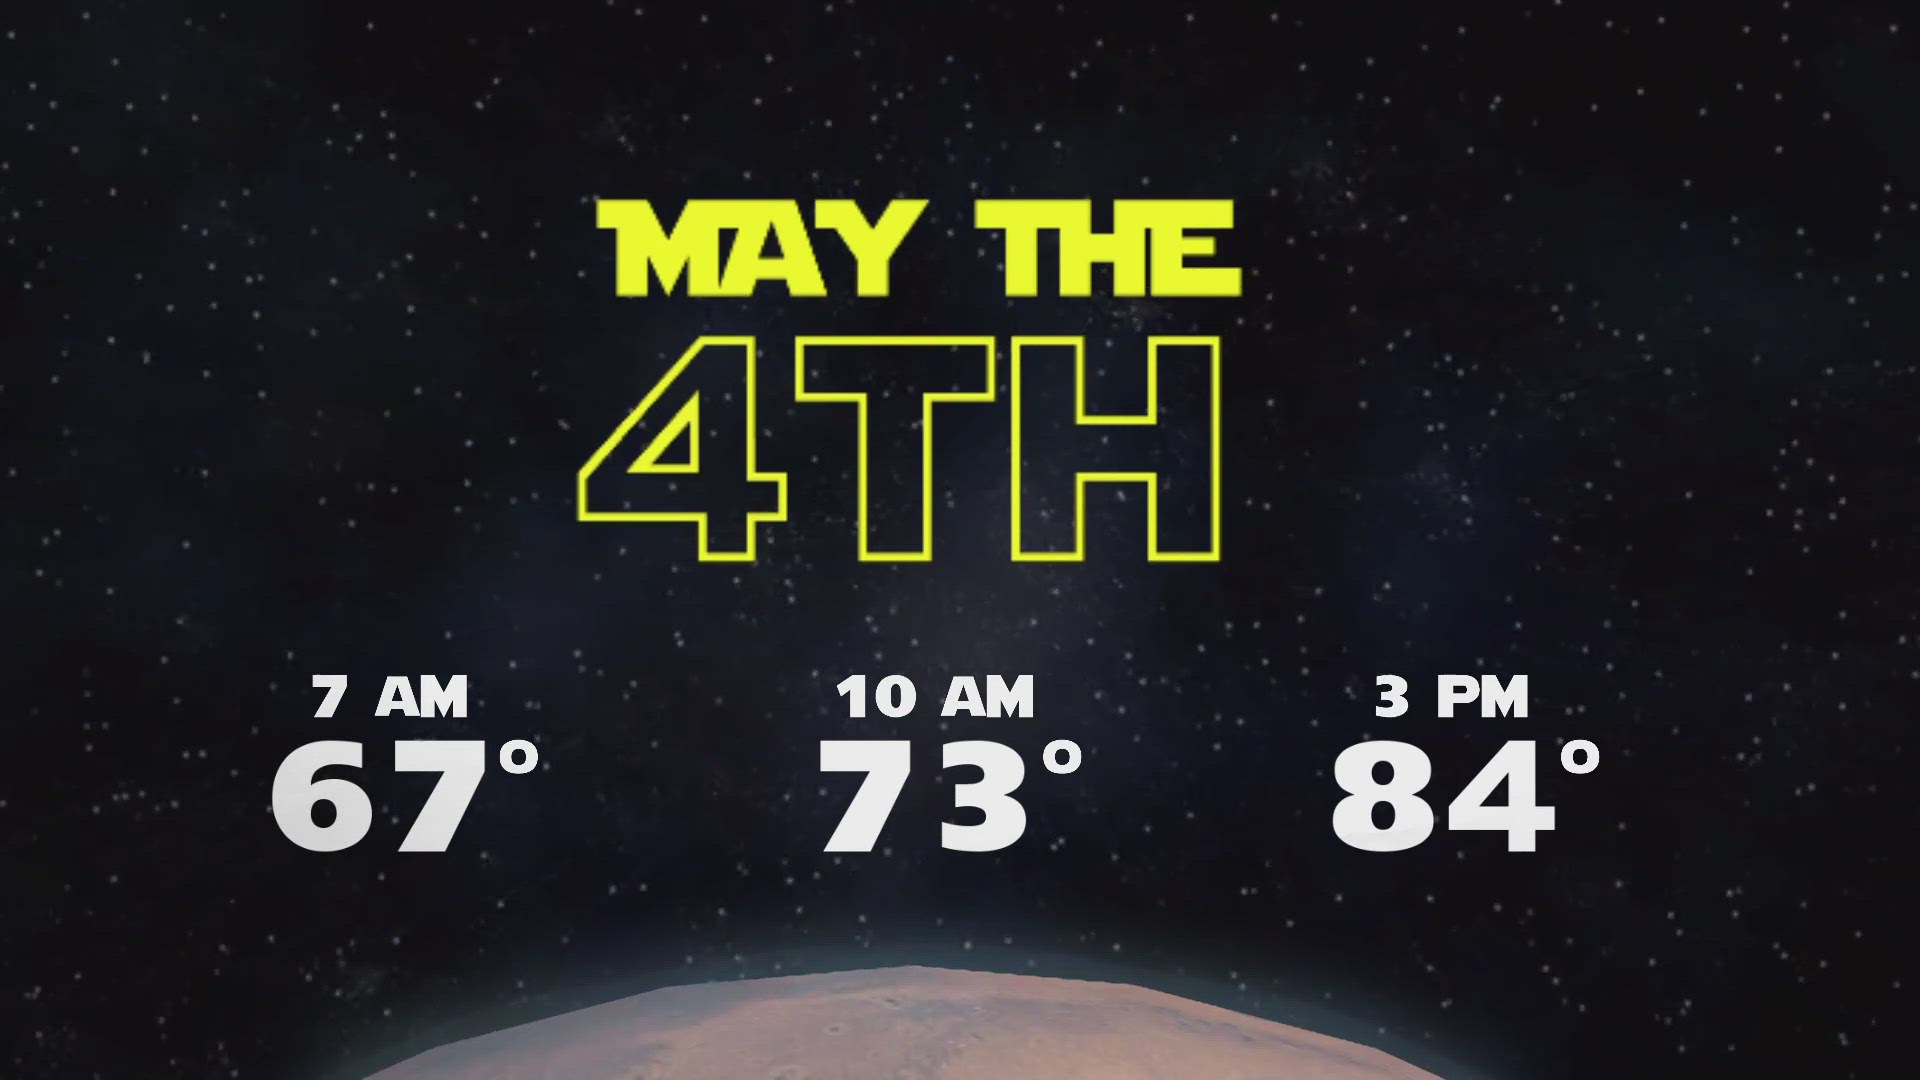 MAY THE FOURTH BE WITH YOU: CBS19 Chief Meteorologist Brett Anthony gives special Star Wars themed forecast